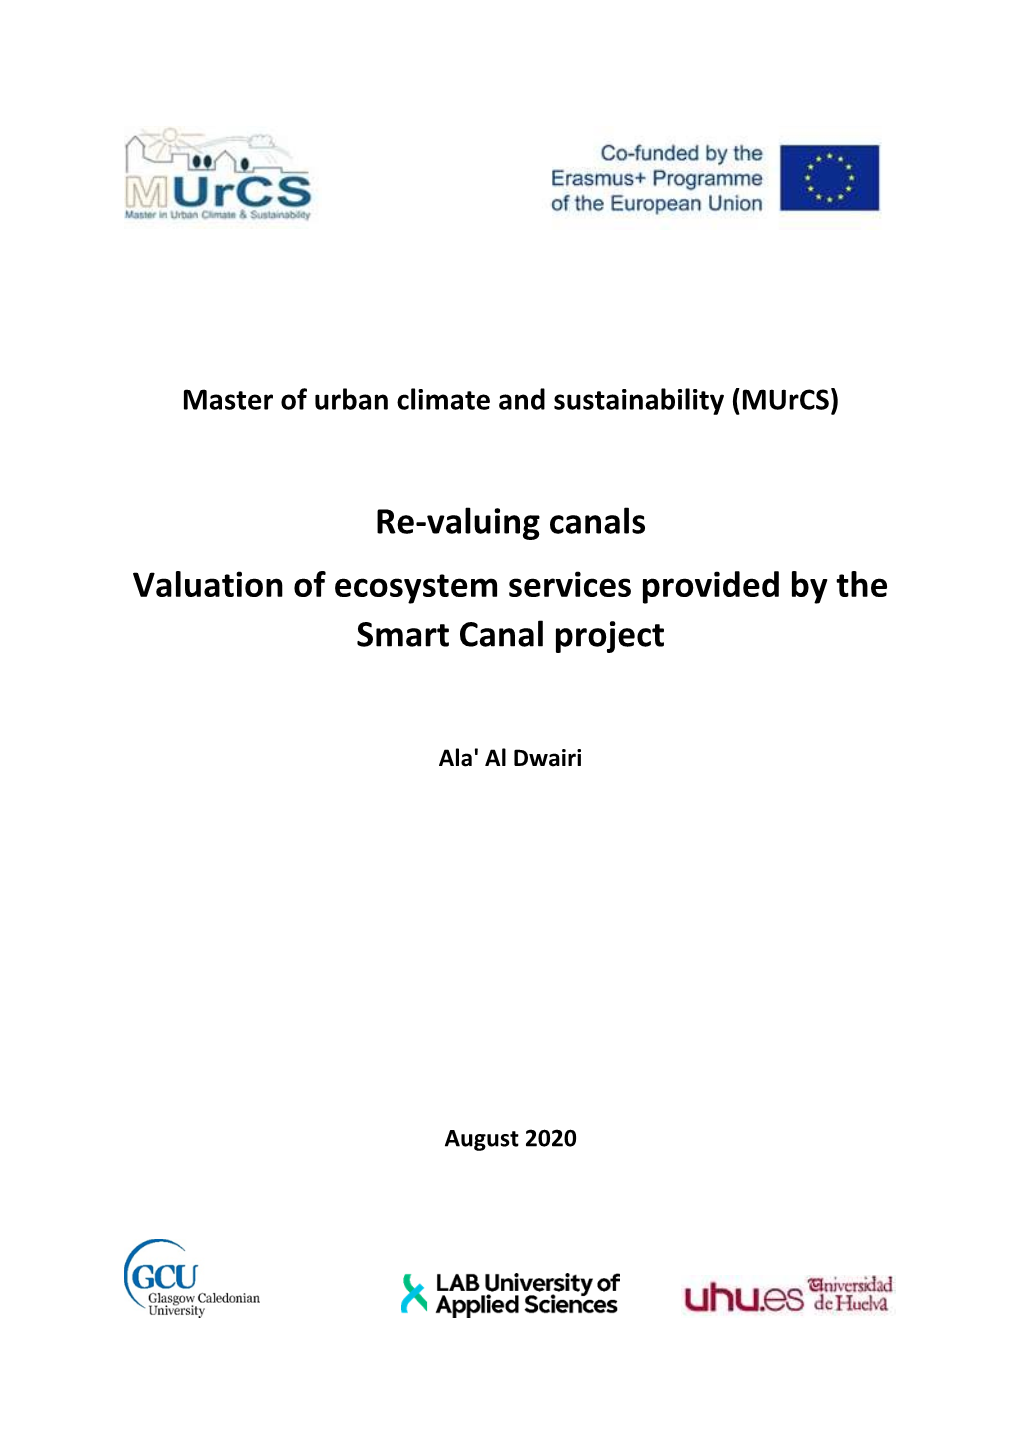 Re-Valuing Canals Valuation of Ecosystem Services Provided by the Smart Canal Project